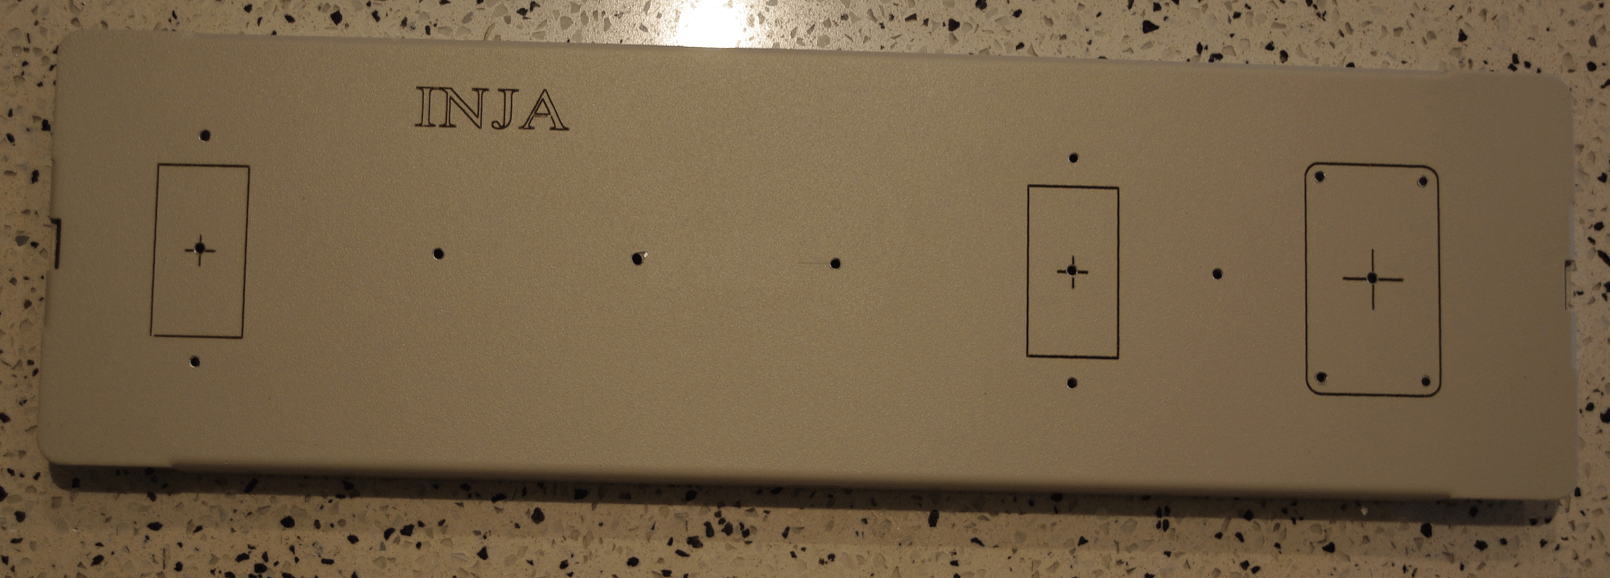 Front Panel